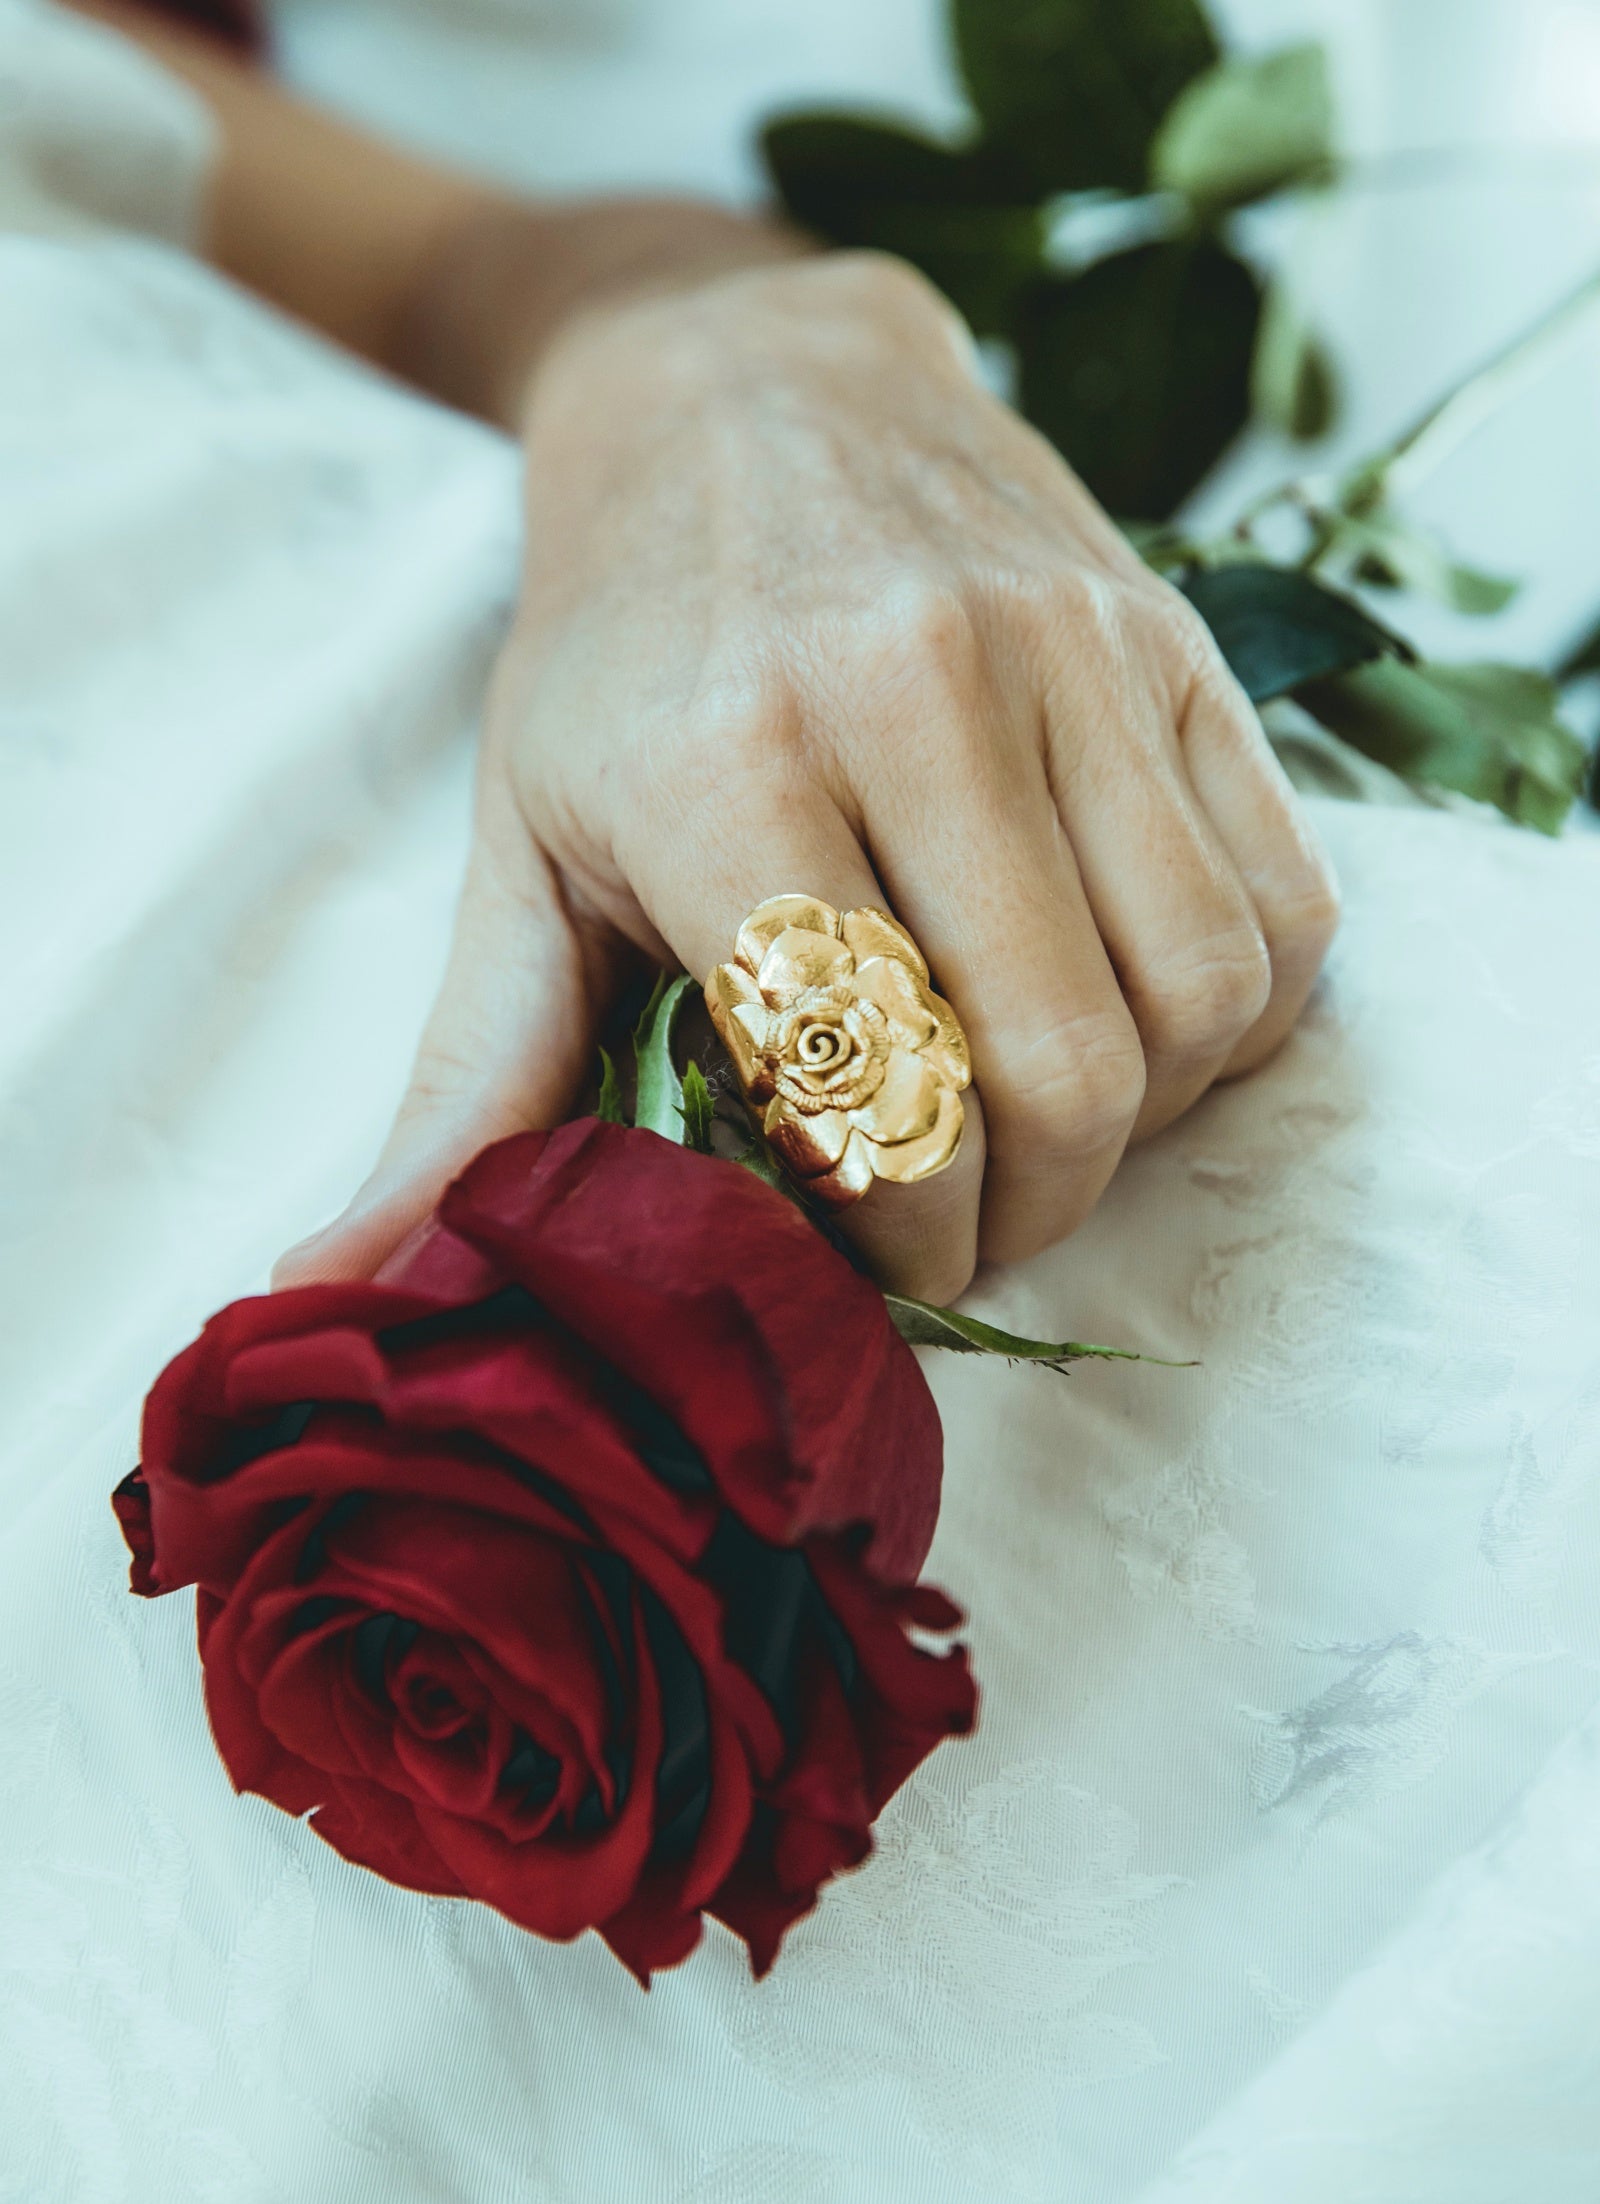 BED OF ROSES RING